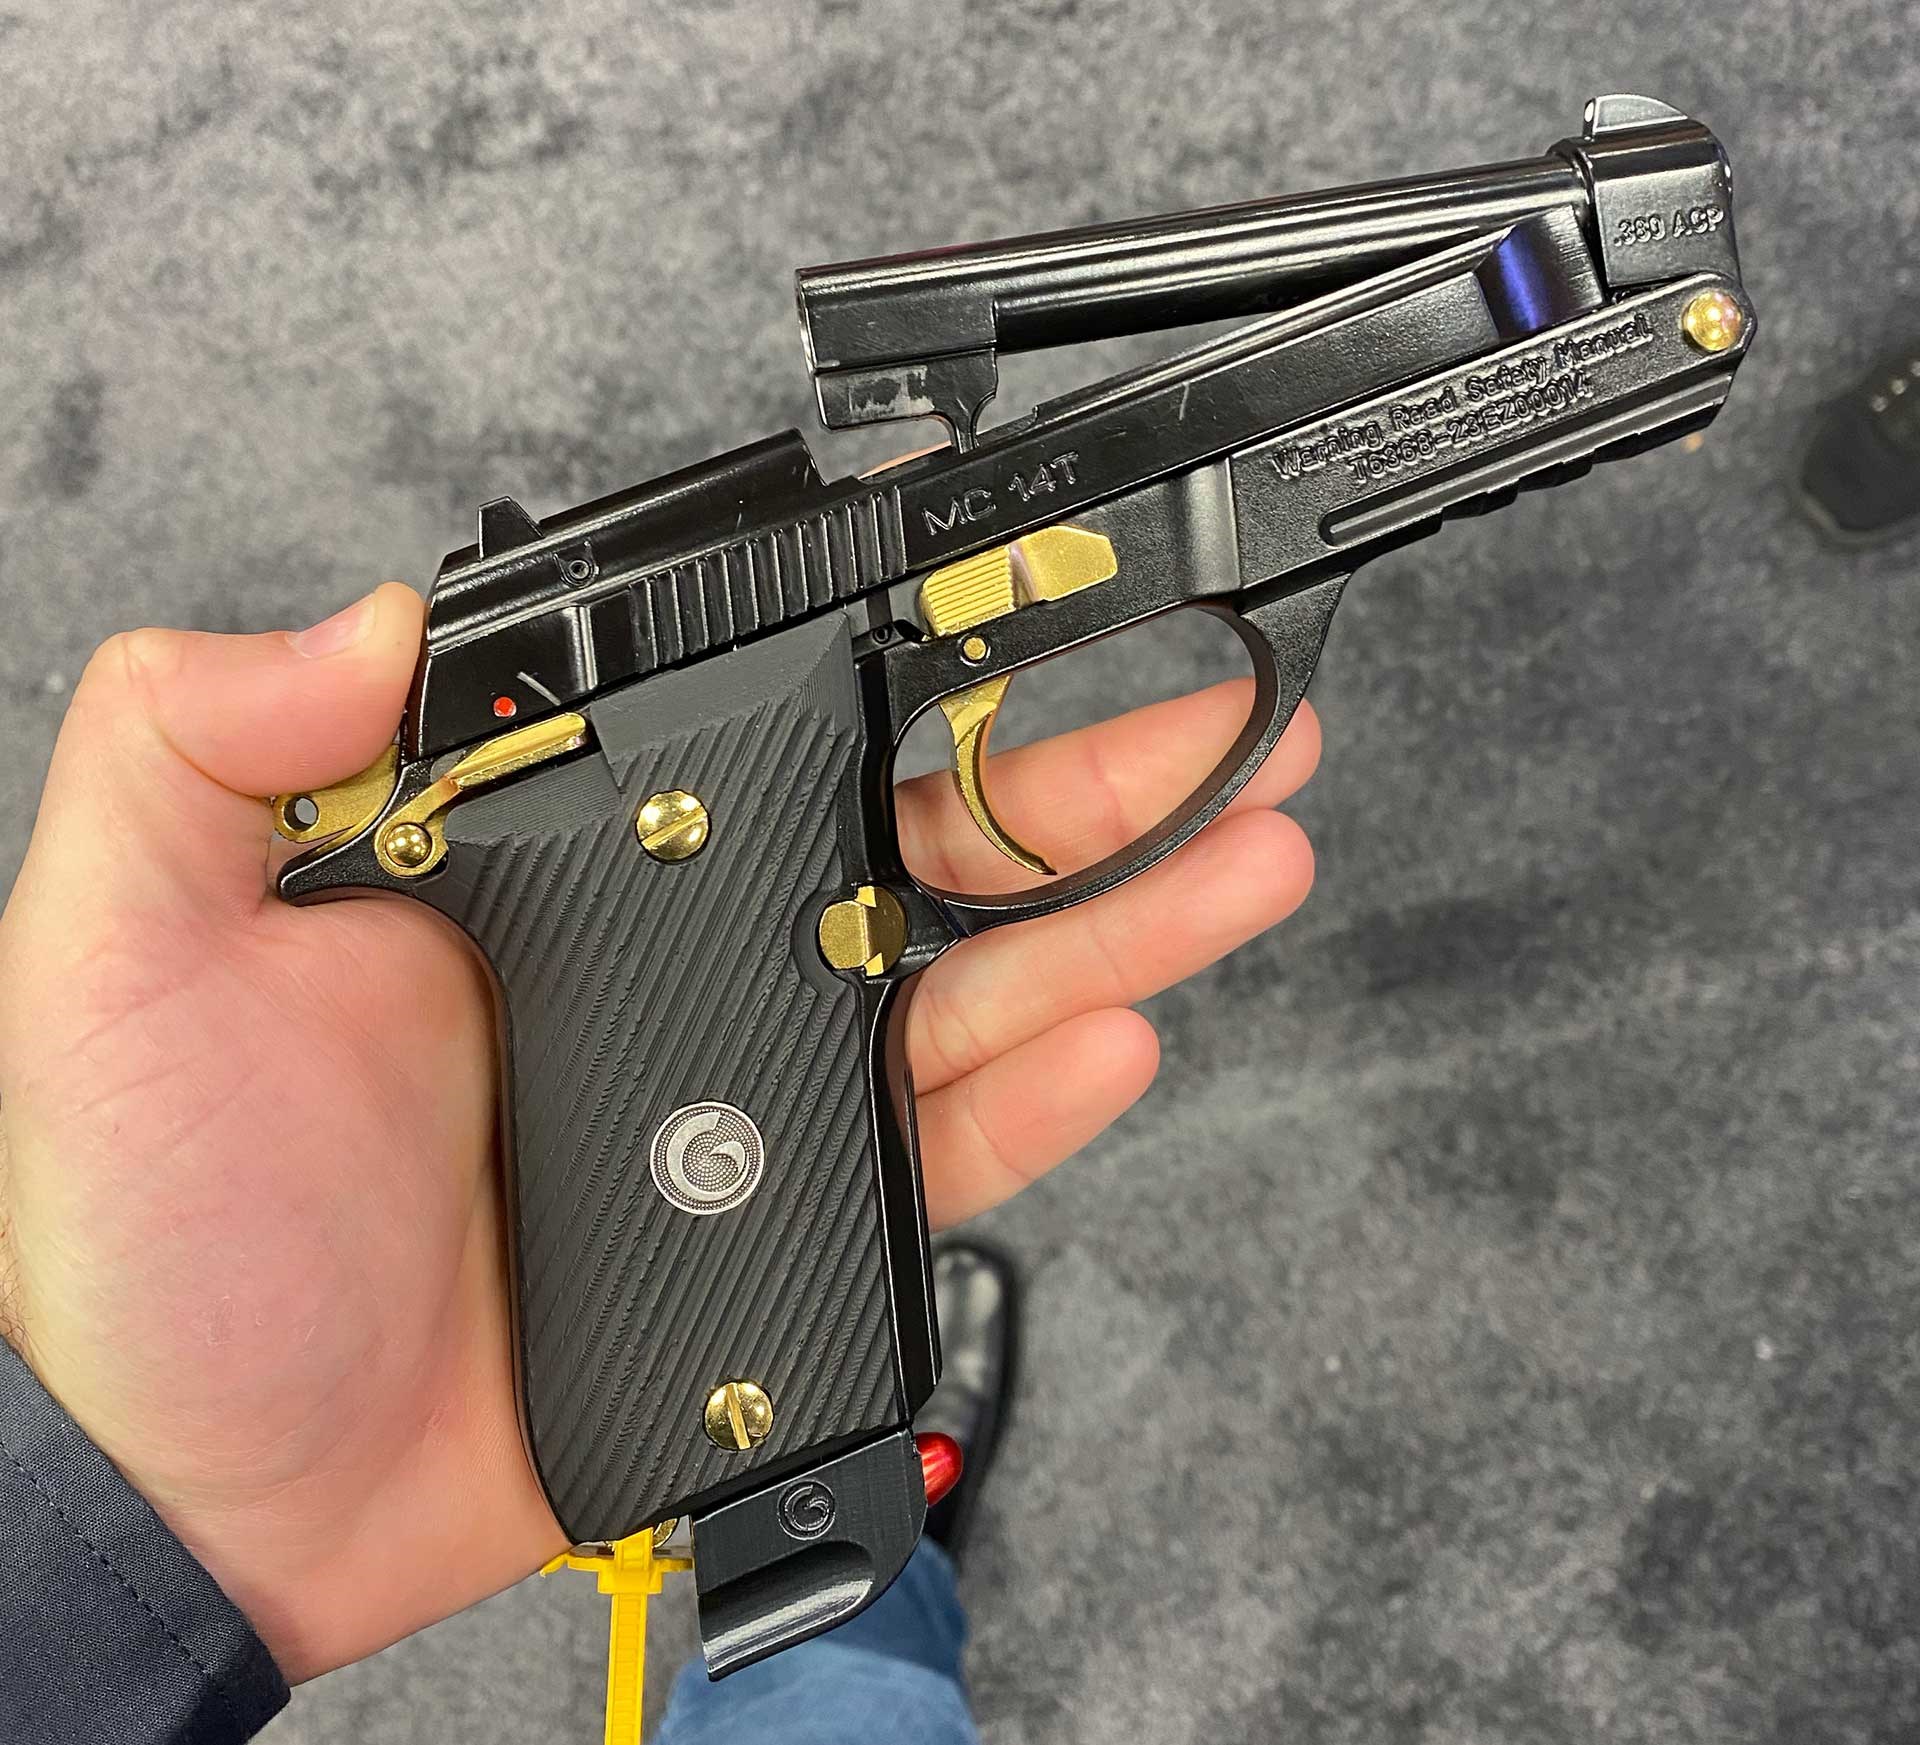 A black EAA MC 14T with gold controls held in a hand.